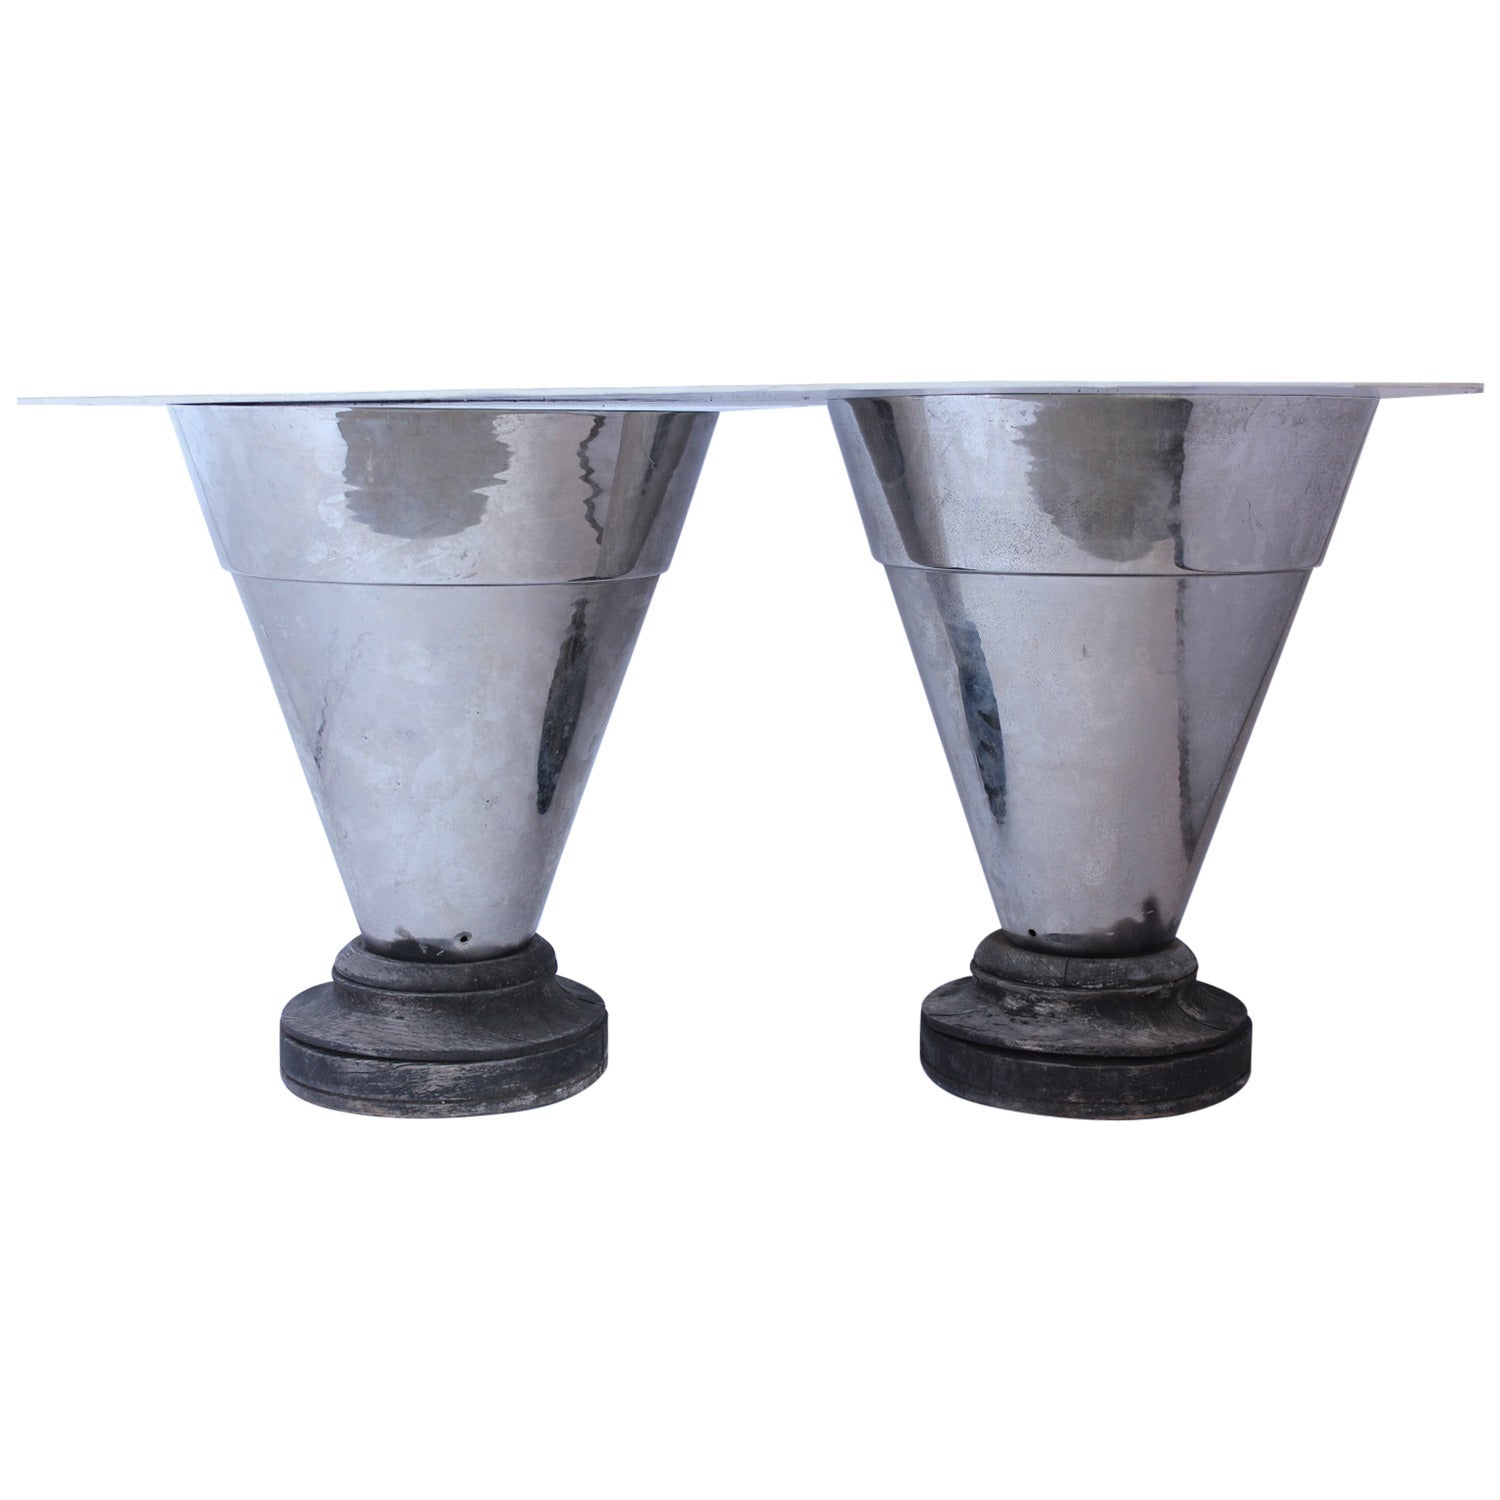 Large Early 20th Century Stylish Metal Urns For Sale